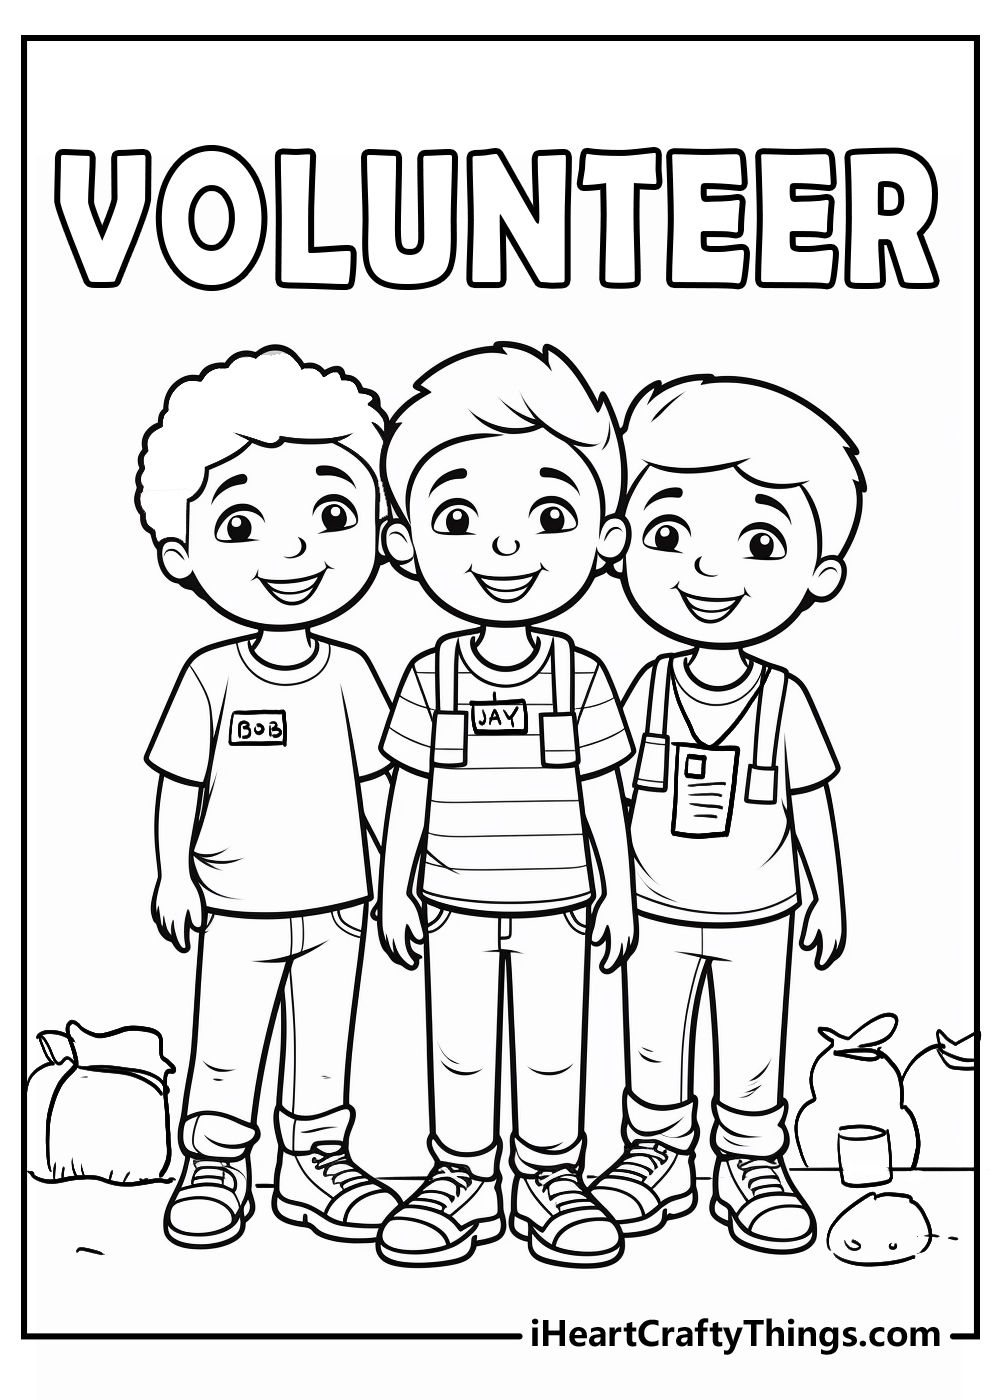 volunteeer coloring pages free download